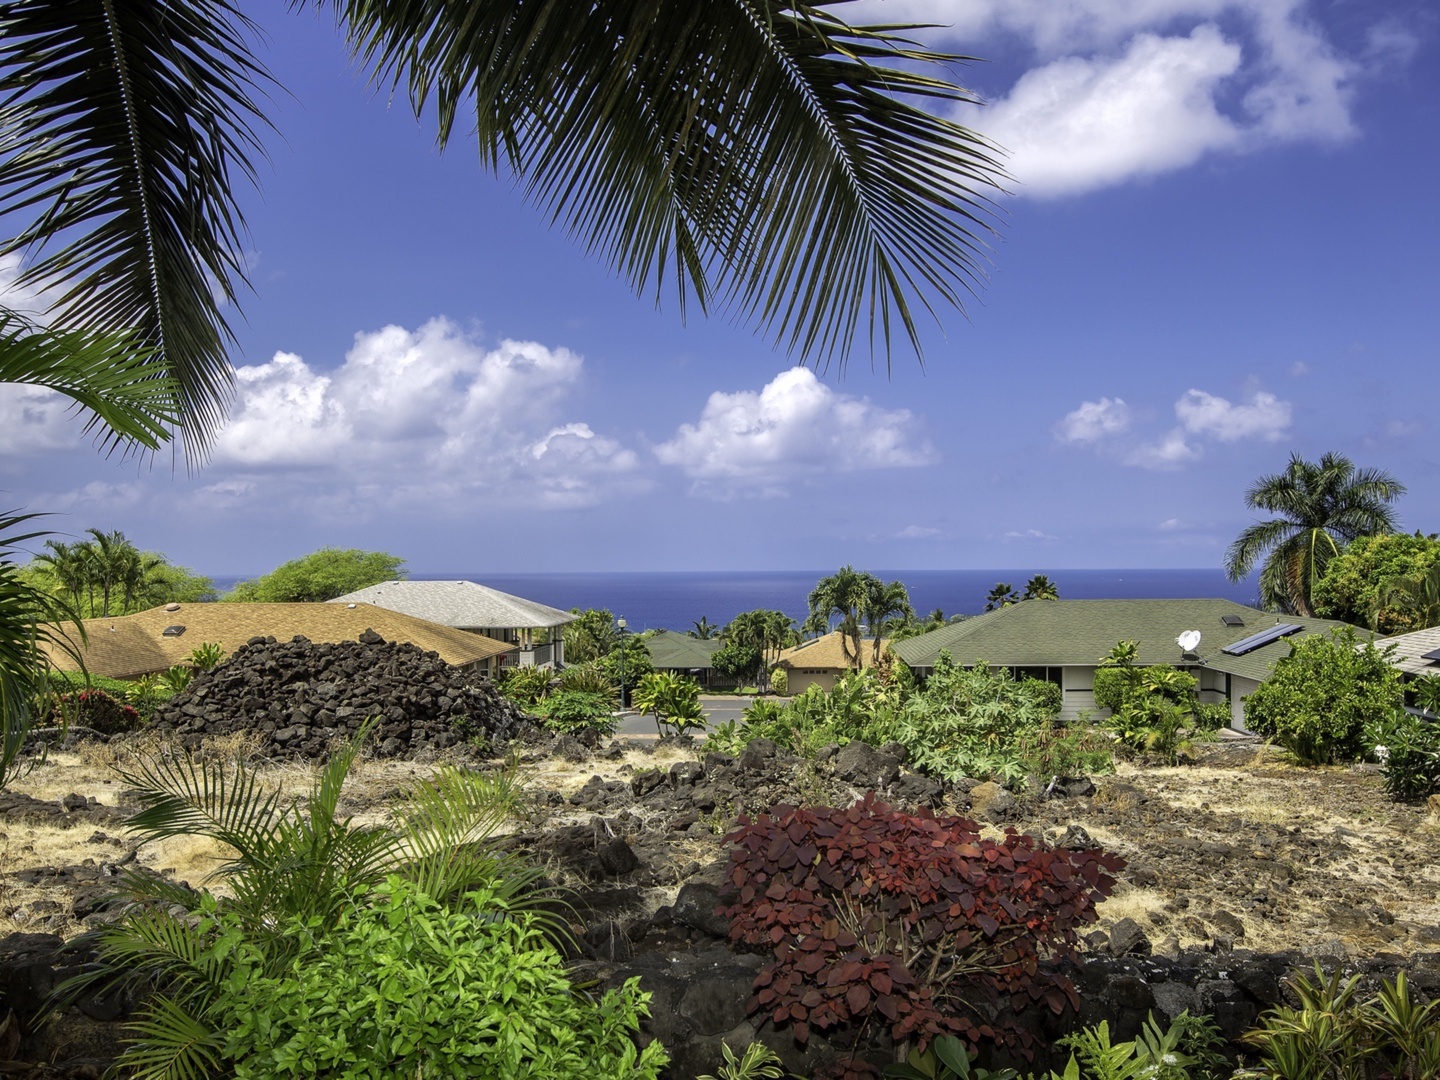 Kailua Kona Vacation Rentals, Hale Alaula - Ocean View - Amazing ocean views from the back lanai as well as the primary bedroom!